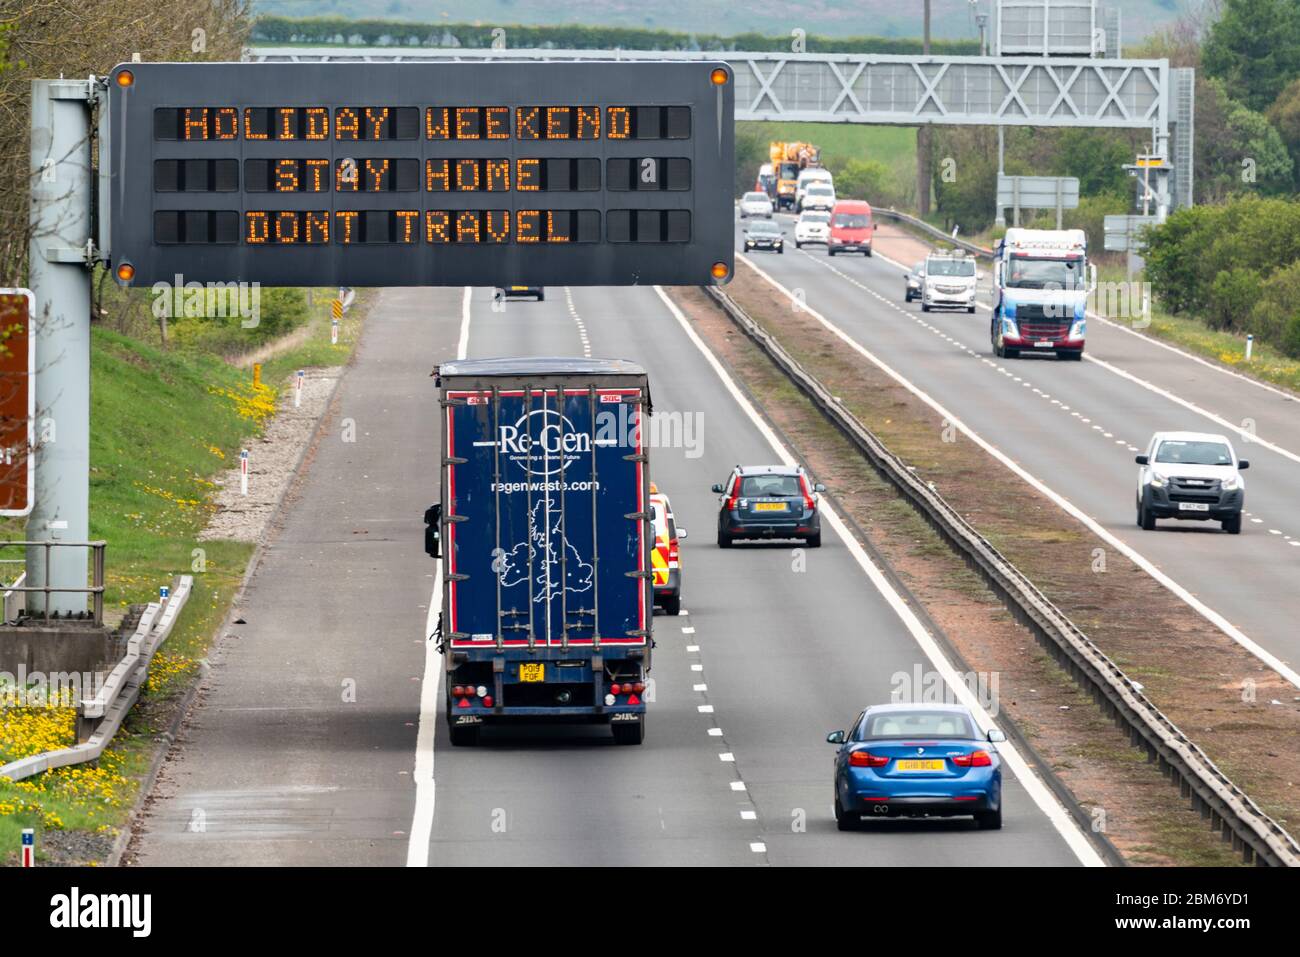 Dunfermline, Scotland, UK. 7 May 2020. Afternoon traffic on M90 in Fife noticeably heavier than normal during coronavirus lockdown. Warning sign telling motorists to stay home over holiday weekend. Iain Masterton/ Alamy Live News. Stock Photo